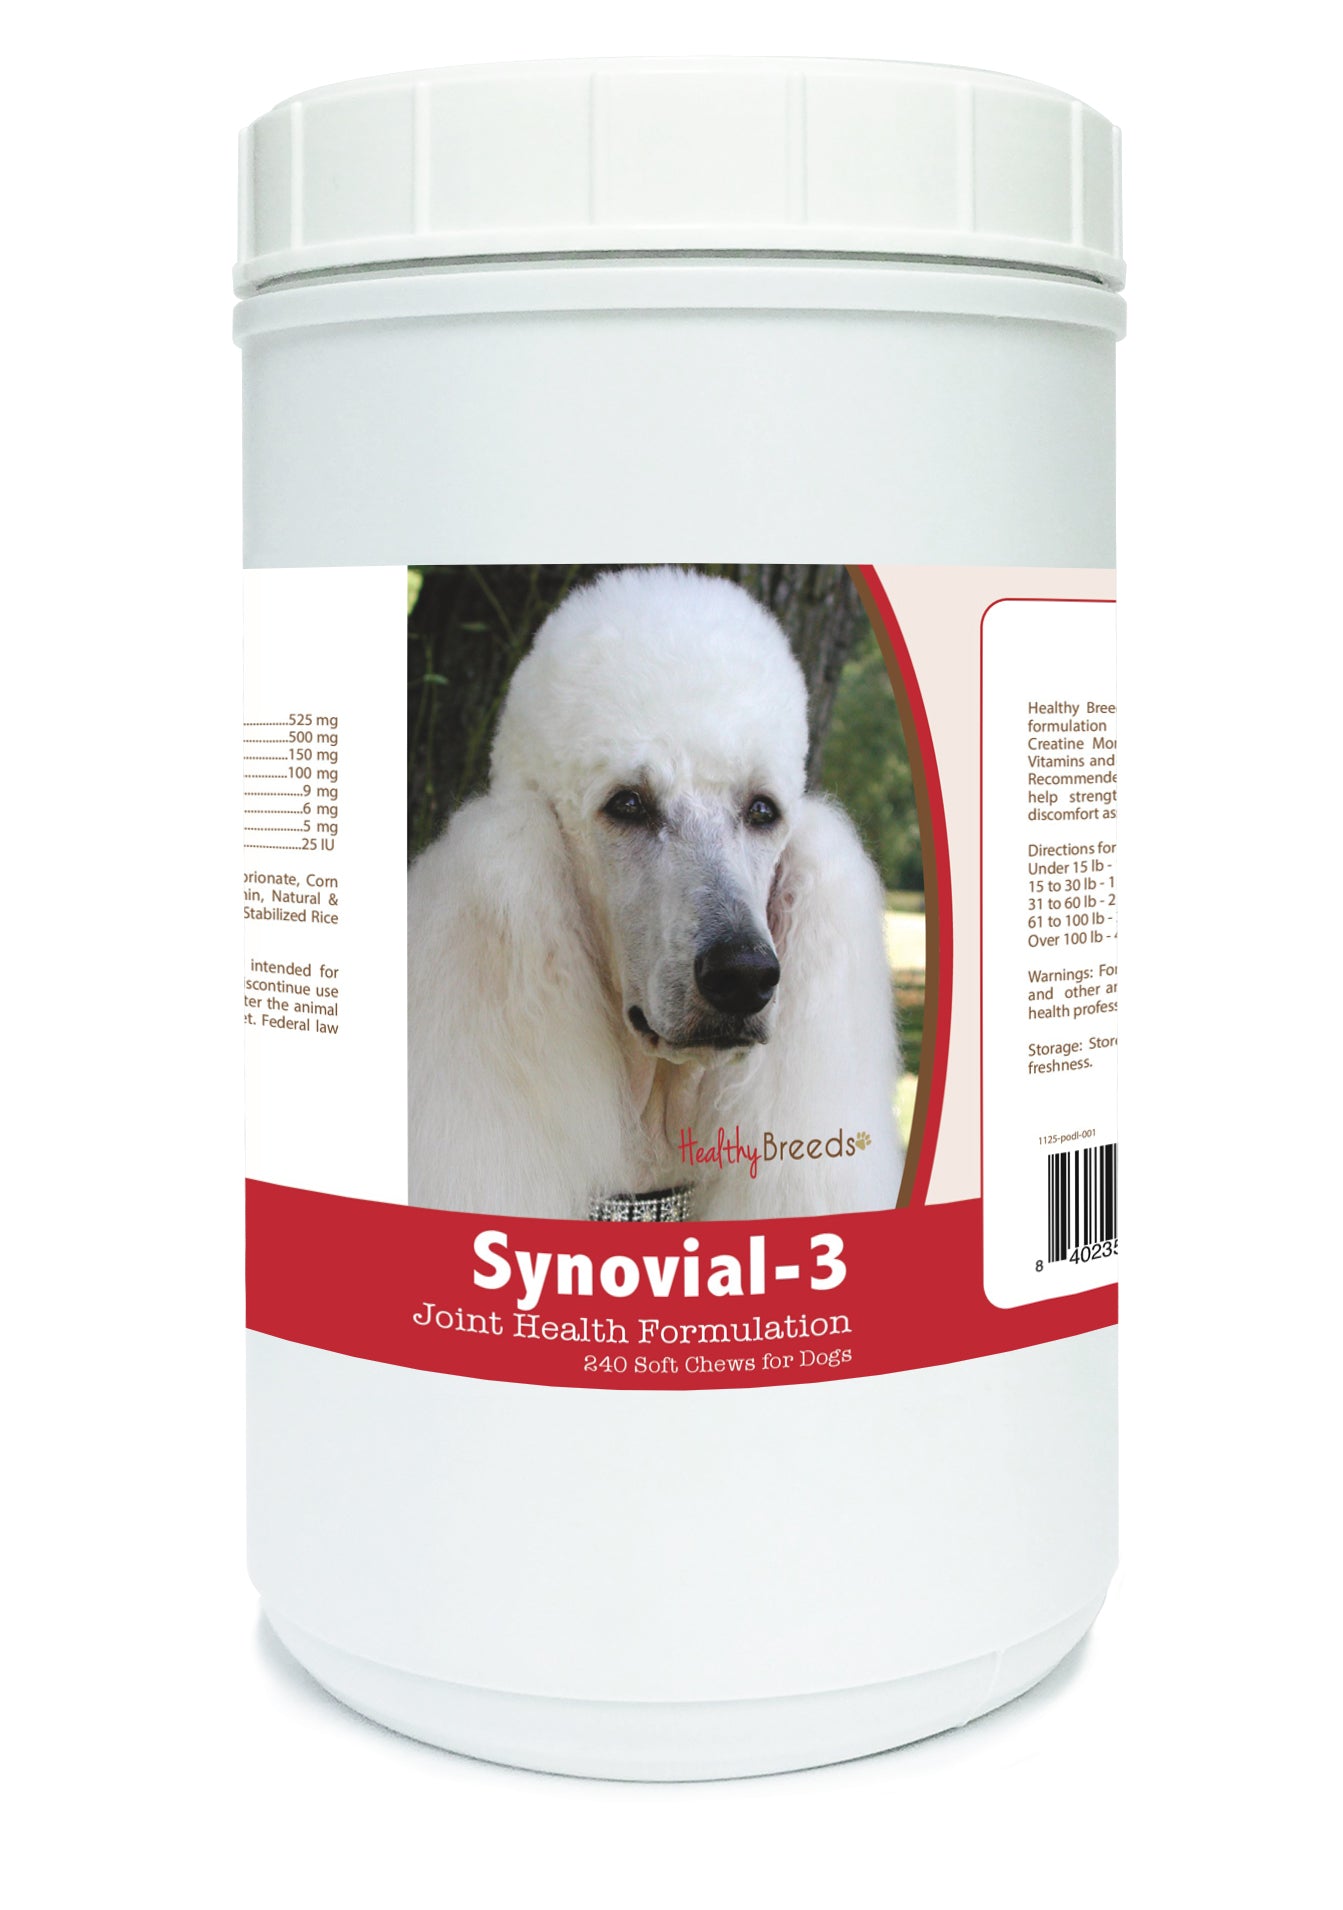 Poodle Synovial-3 Joint Health Formulation Soft Chews 240 Count